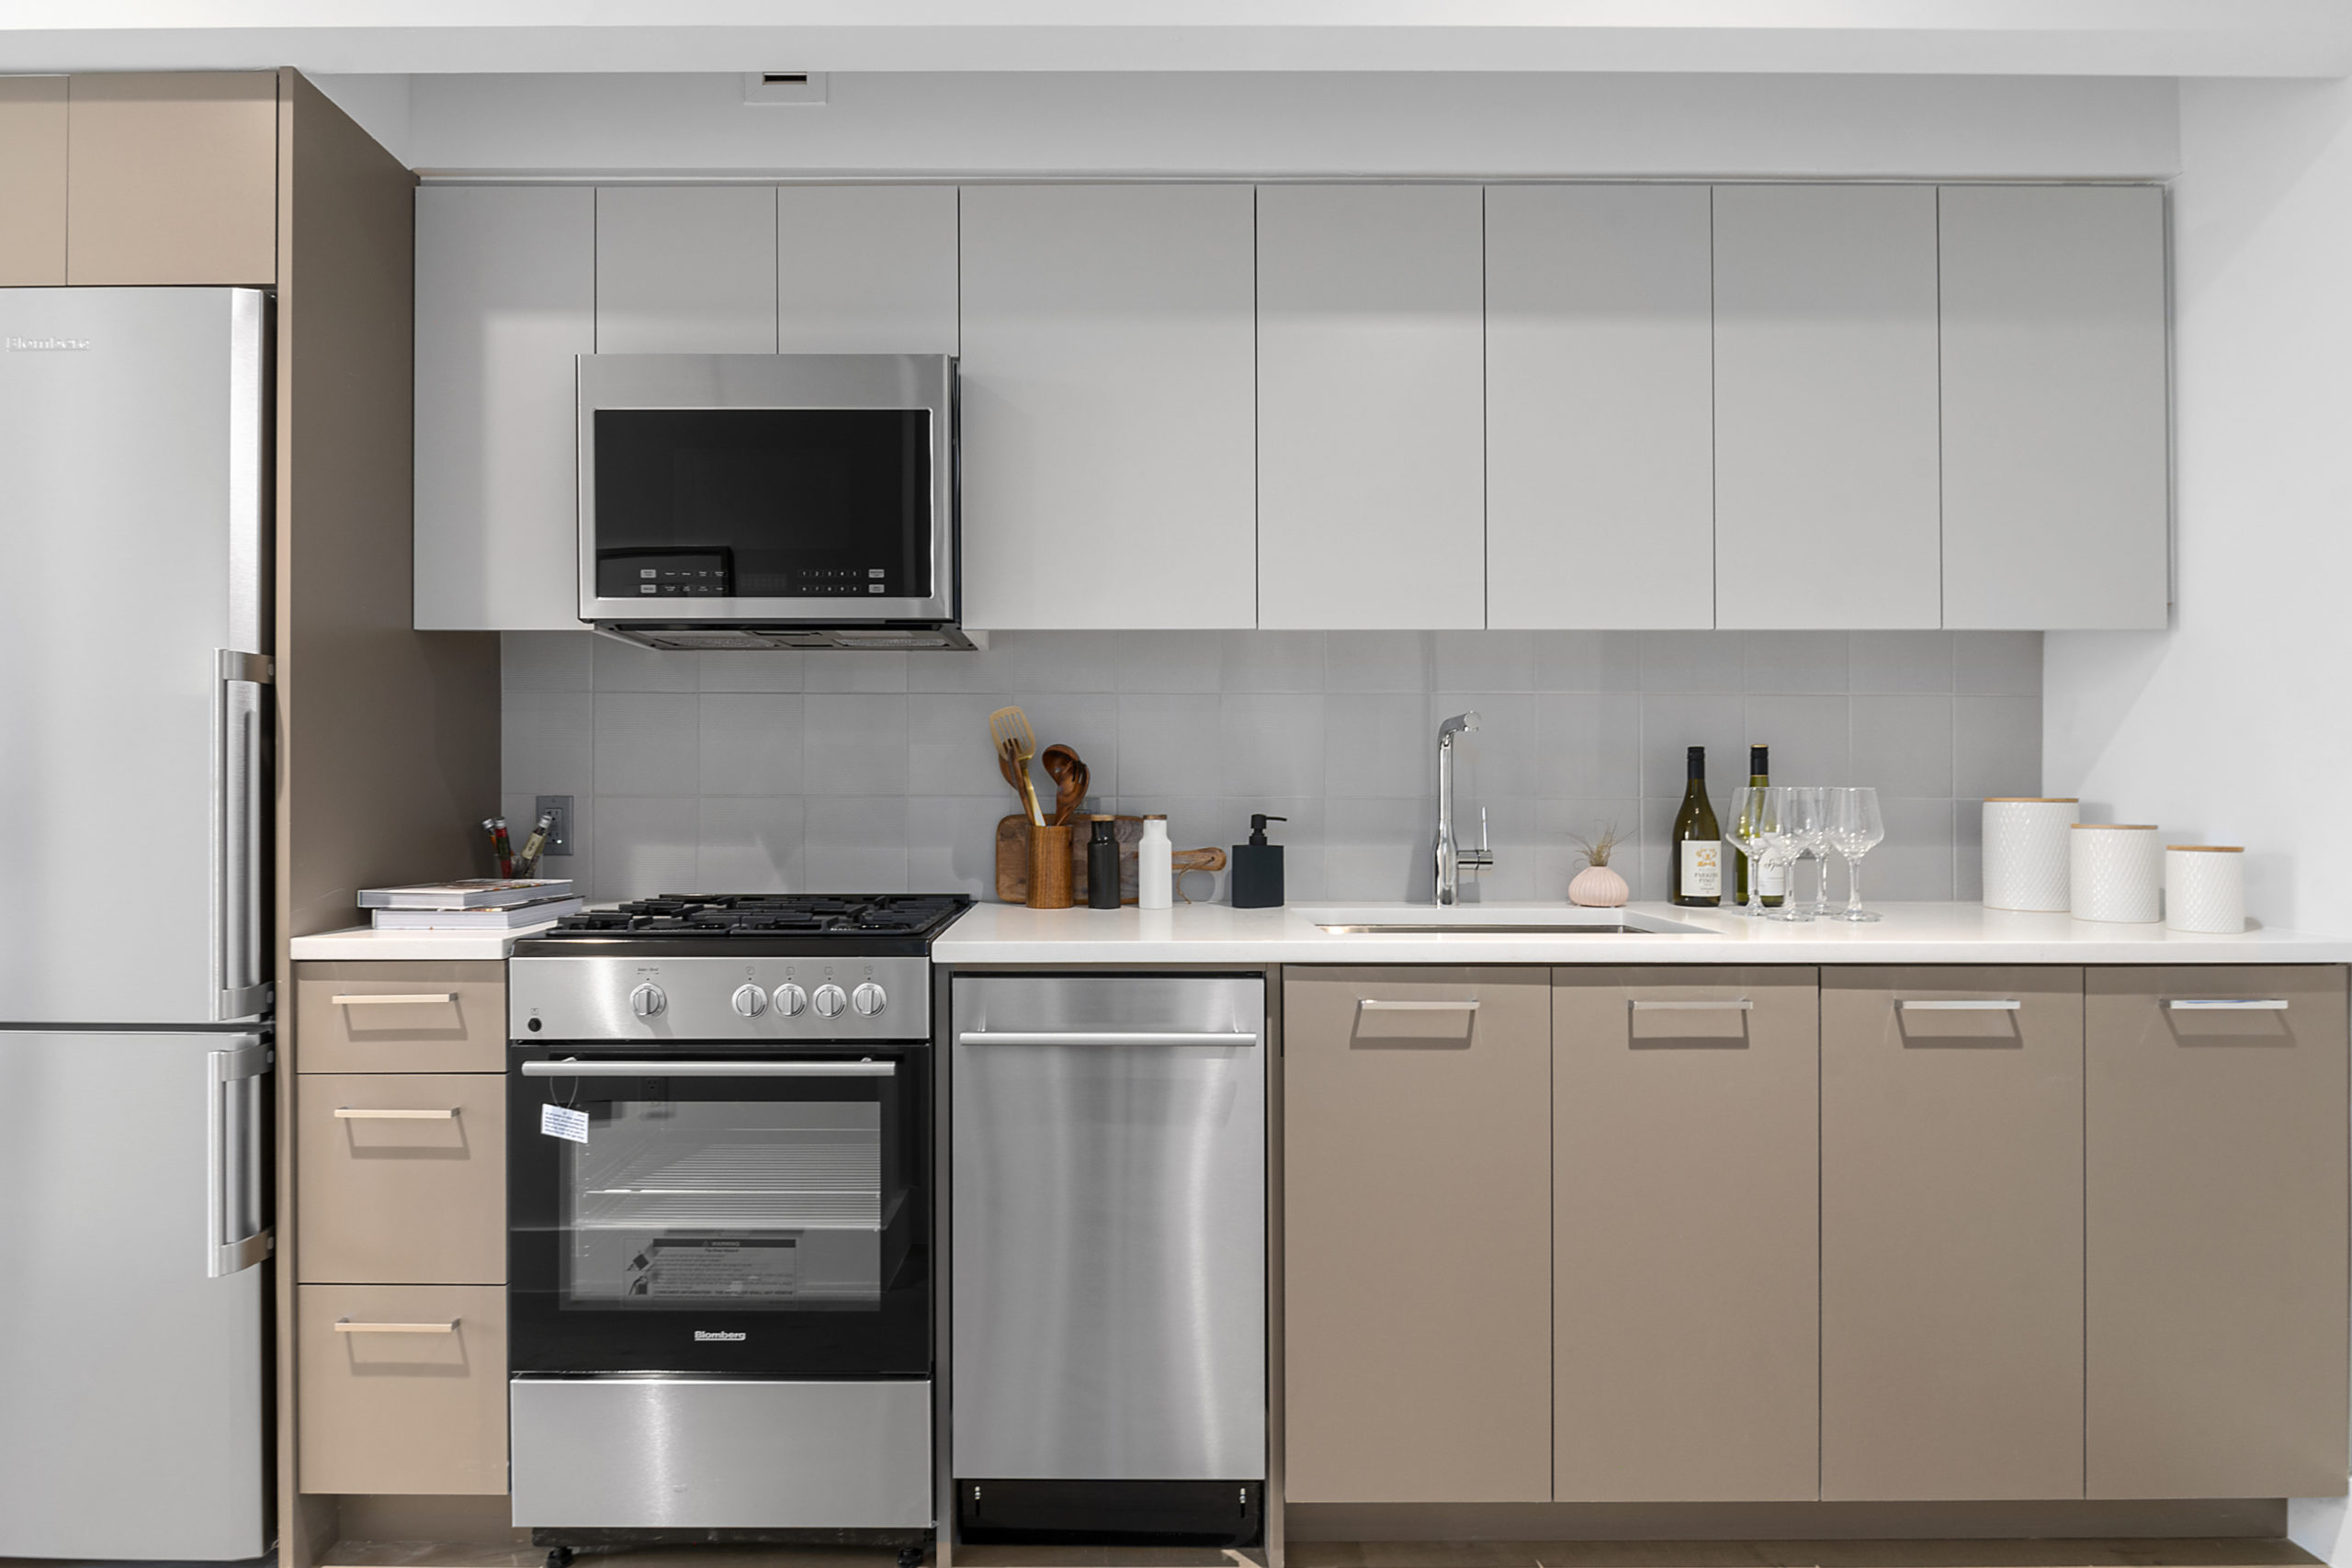 Modern kitchen with light grey and tan cabinetry, white counters, stainlless steel fridge, microwave, stove and dishwasher